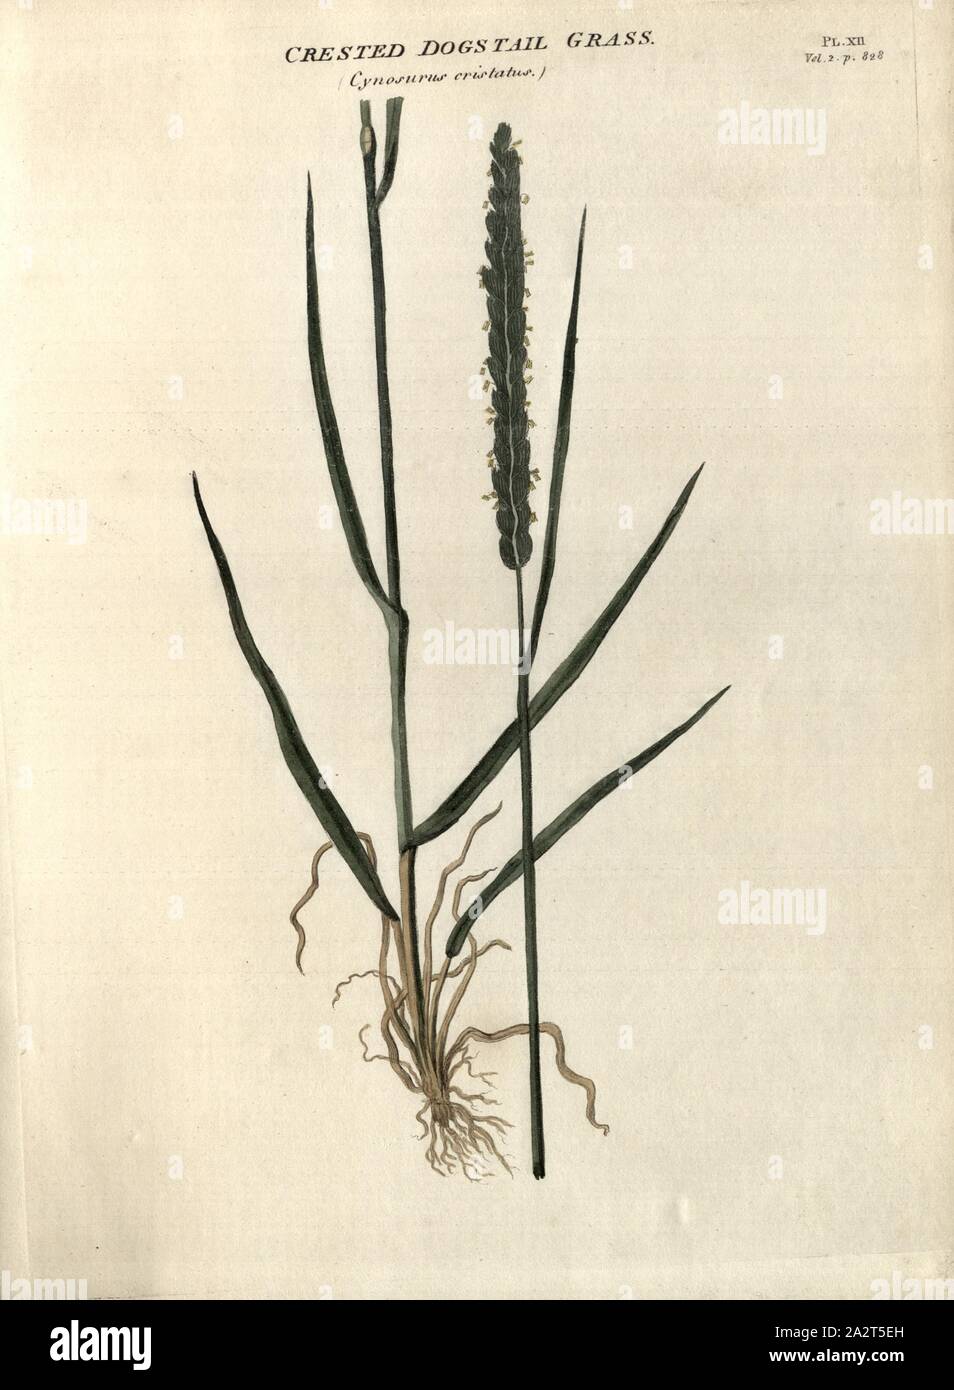 Crested Dogstail Grass Cynosurus cristatus, Meadow Crested Grass, Fig. 12, Pl. XII, after p. 828, R.W. Dickson: Practical agriculture, or, a complete system of modern husbandry: with the methods of planting, and the management of live stock. Bd. 2. London: printed for Richard Phillips; by R. Taylor and Co., 1805 Stock Photo